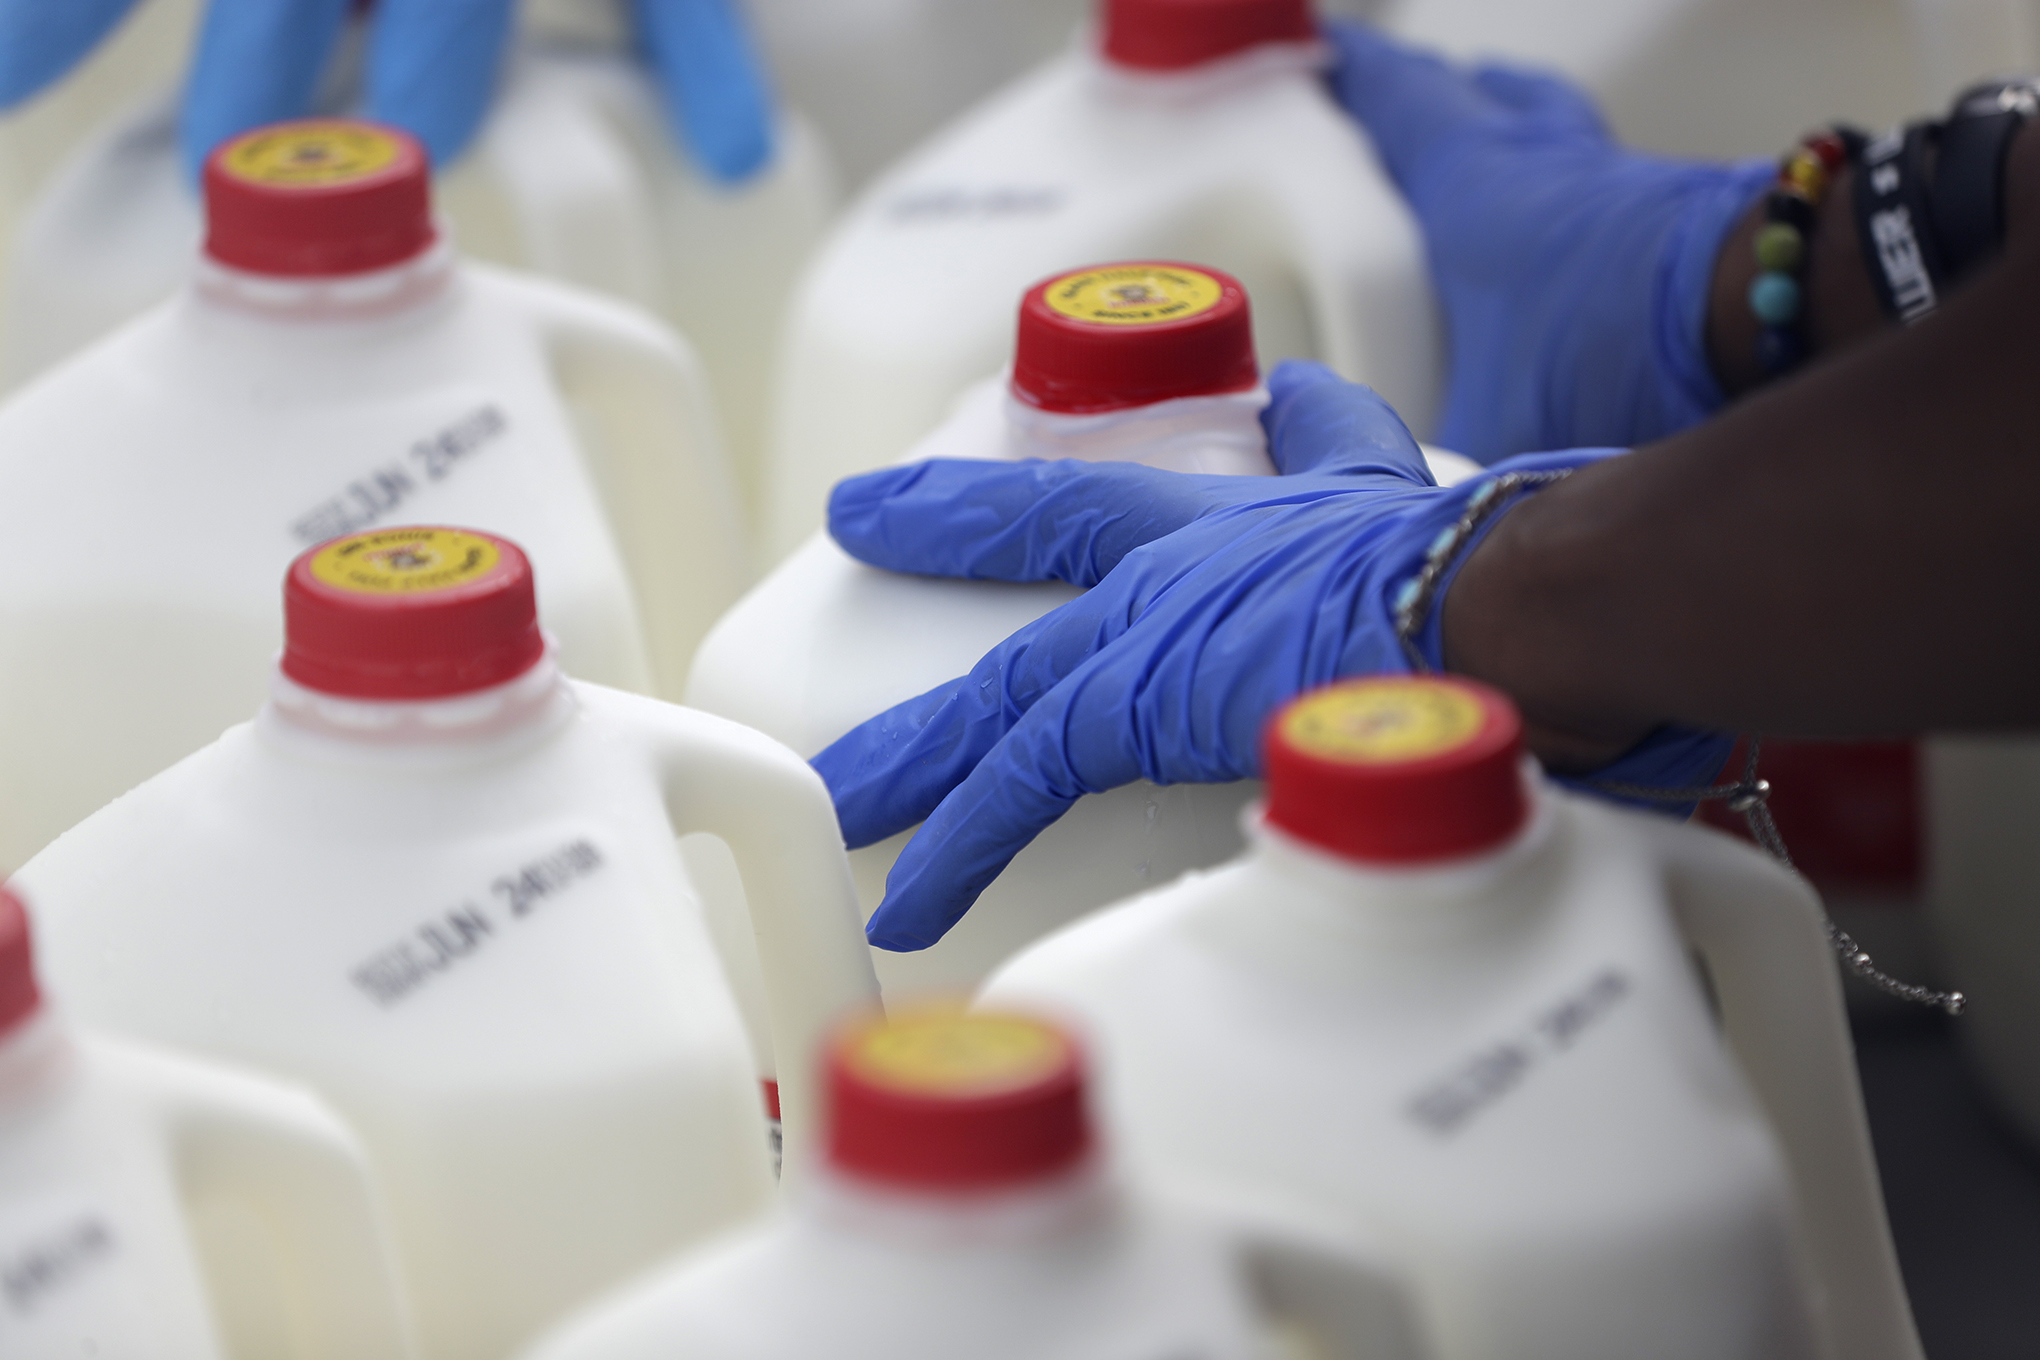 FDA releases draft guidance on how to label plant-based milk : NPR